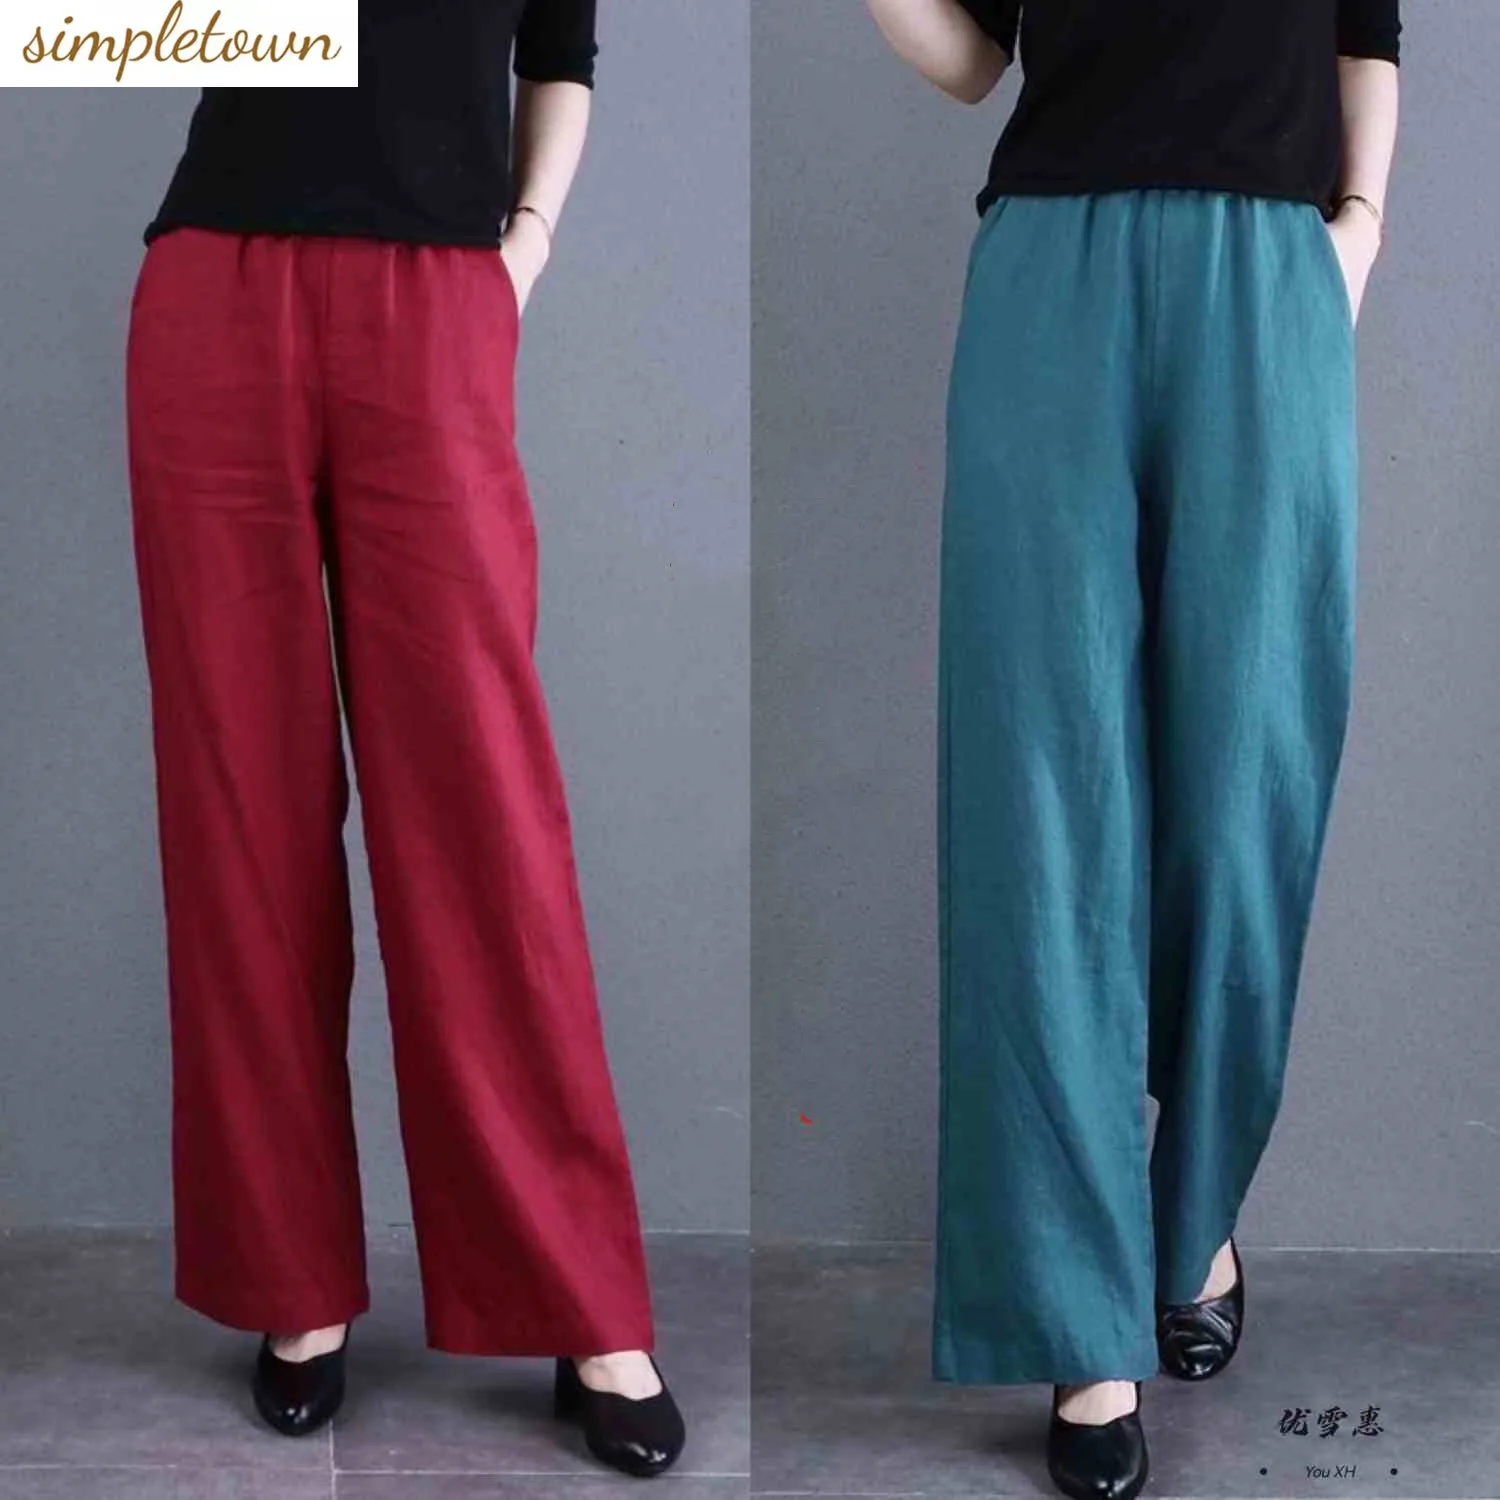 Spring/Summer 2023 New Art Cotton Hemp Wide Leg Pants with Elastic Waist for a Slim and Slim Drop Feel Casual Straight Leg Pants